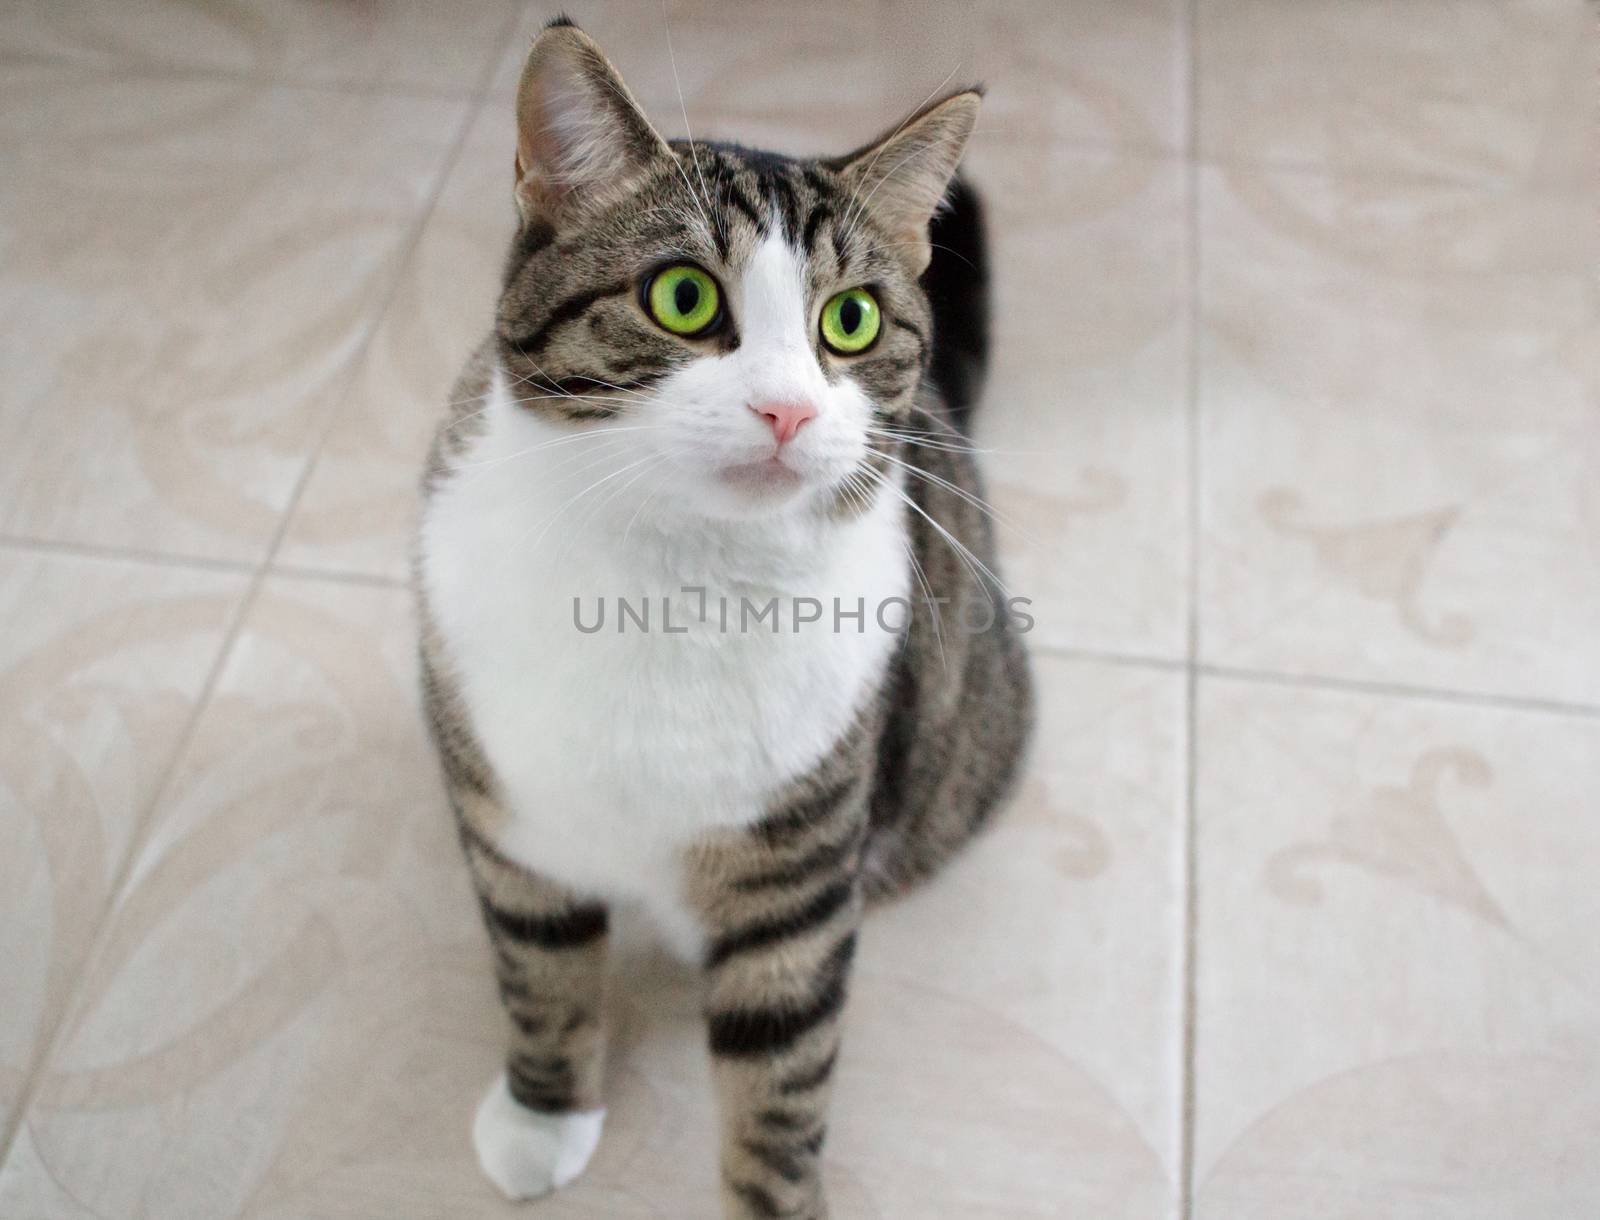 Domestic pet cat with bright green eyes sits on floor posing and ready to attack